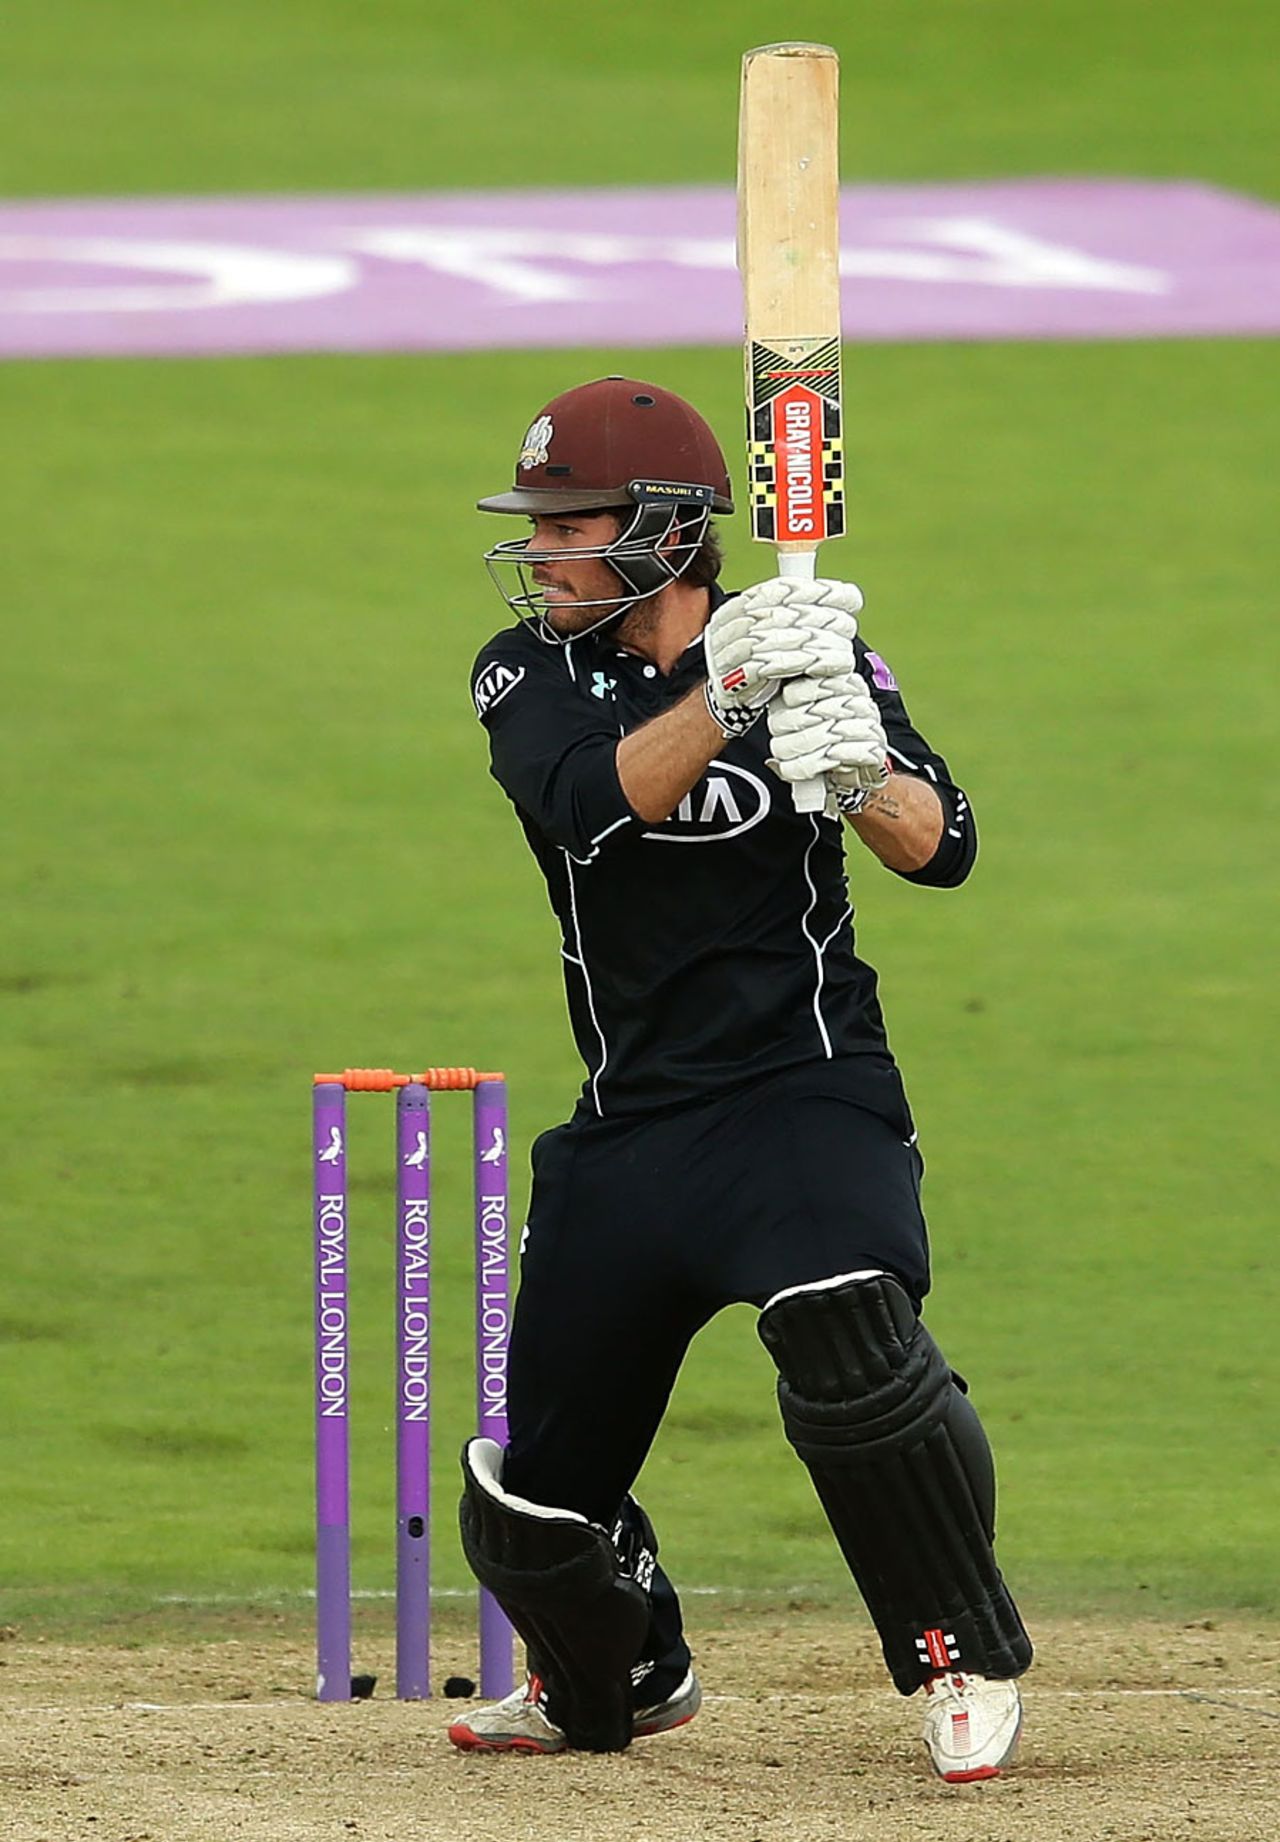 Ben Foakes made 90 to help Surrey recover, Yorkshire v Surrey, Royal London Cup, Semi-final, Headingley, August 28, 2016